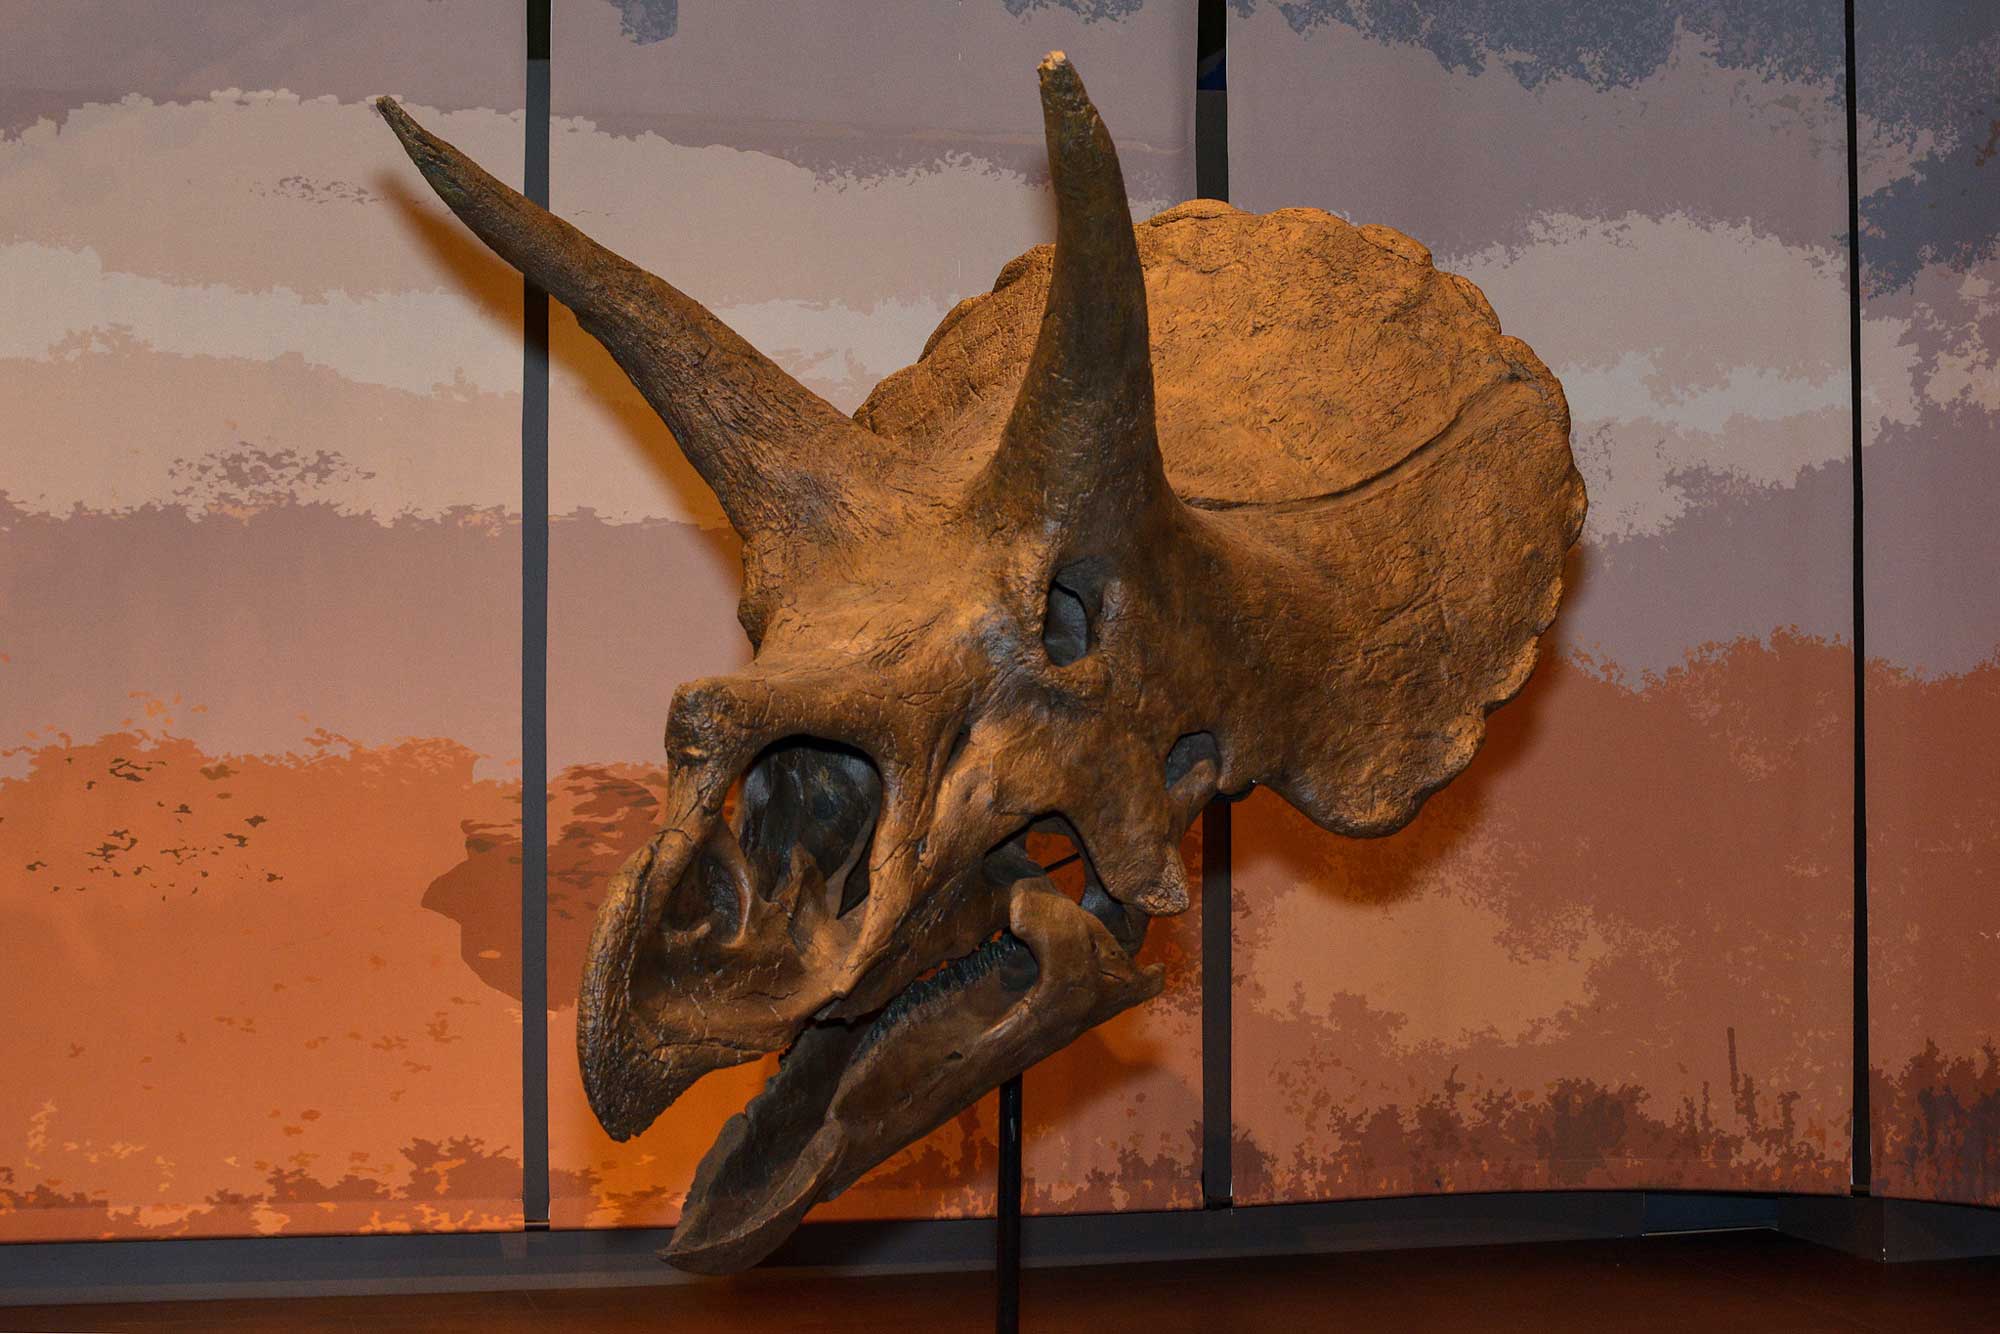 Photograph of a Triceratops skull on display at the Tellus Science Museum in Georgia.